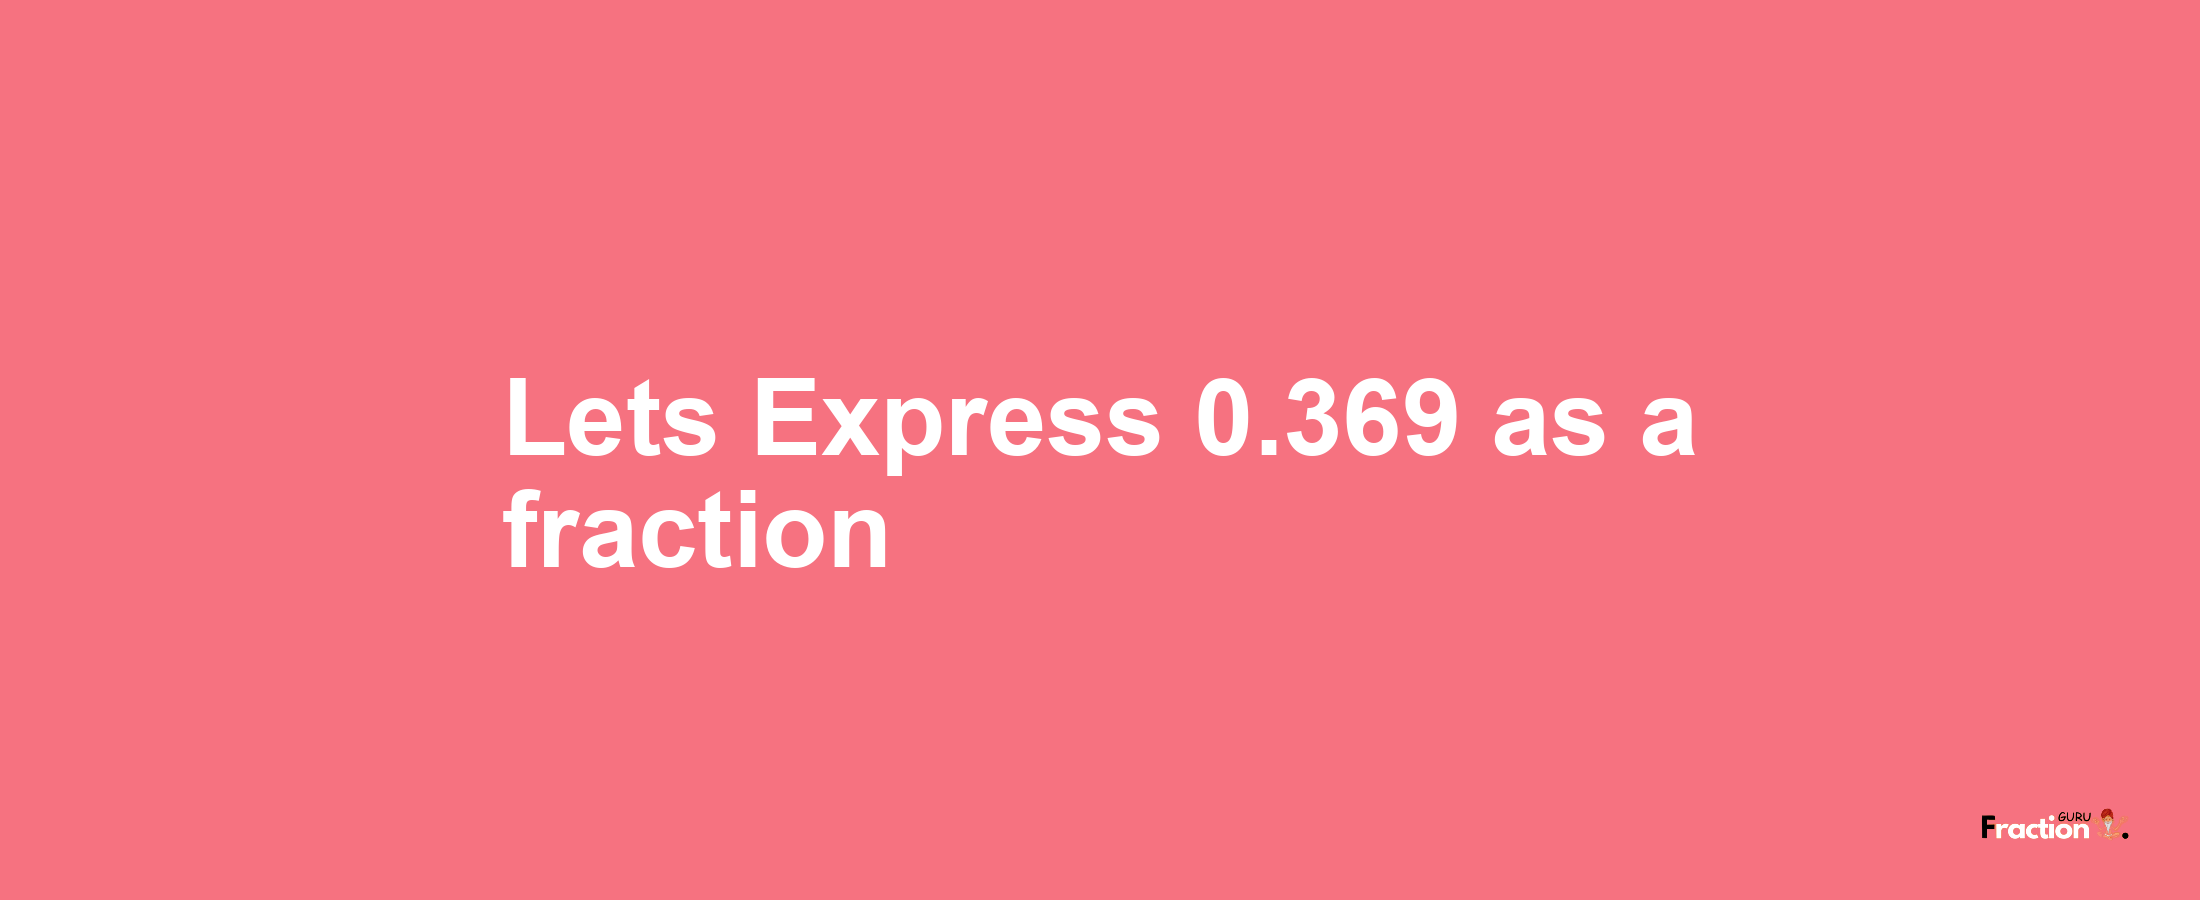 Lets Express 0.369 as afraction